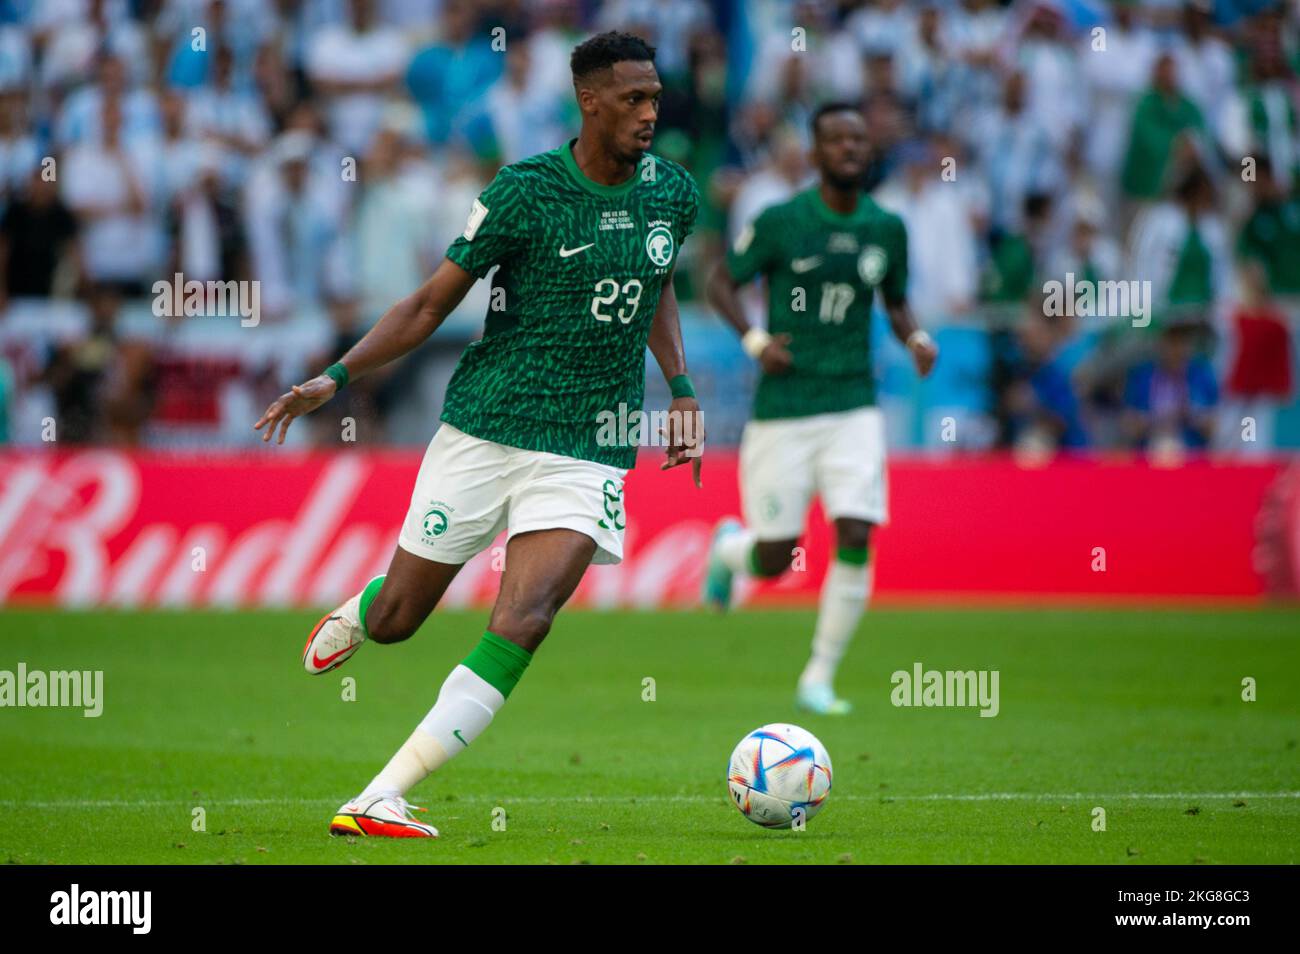 MOHAMED KANNO of Saudi Arabia during the FIFA World Cup Qatar 2022 Group C match between Argentina and Saudi Arabia at Lusail Stadium in Al Daayen, Qatar on November 22, 2022 (Photo by Andrew Surma/ SIPA USA) Stock Photo